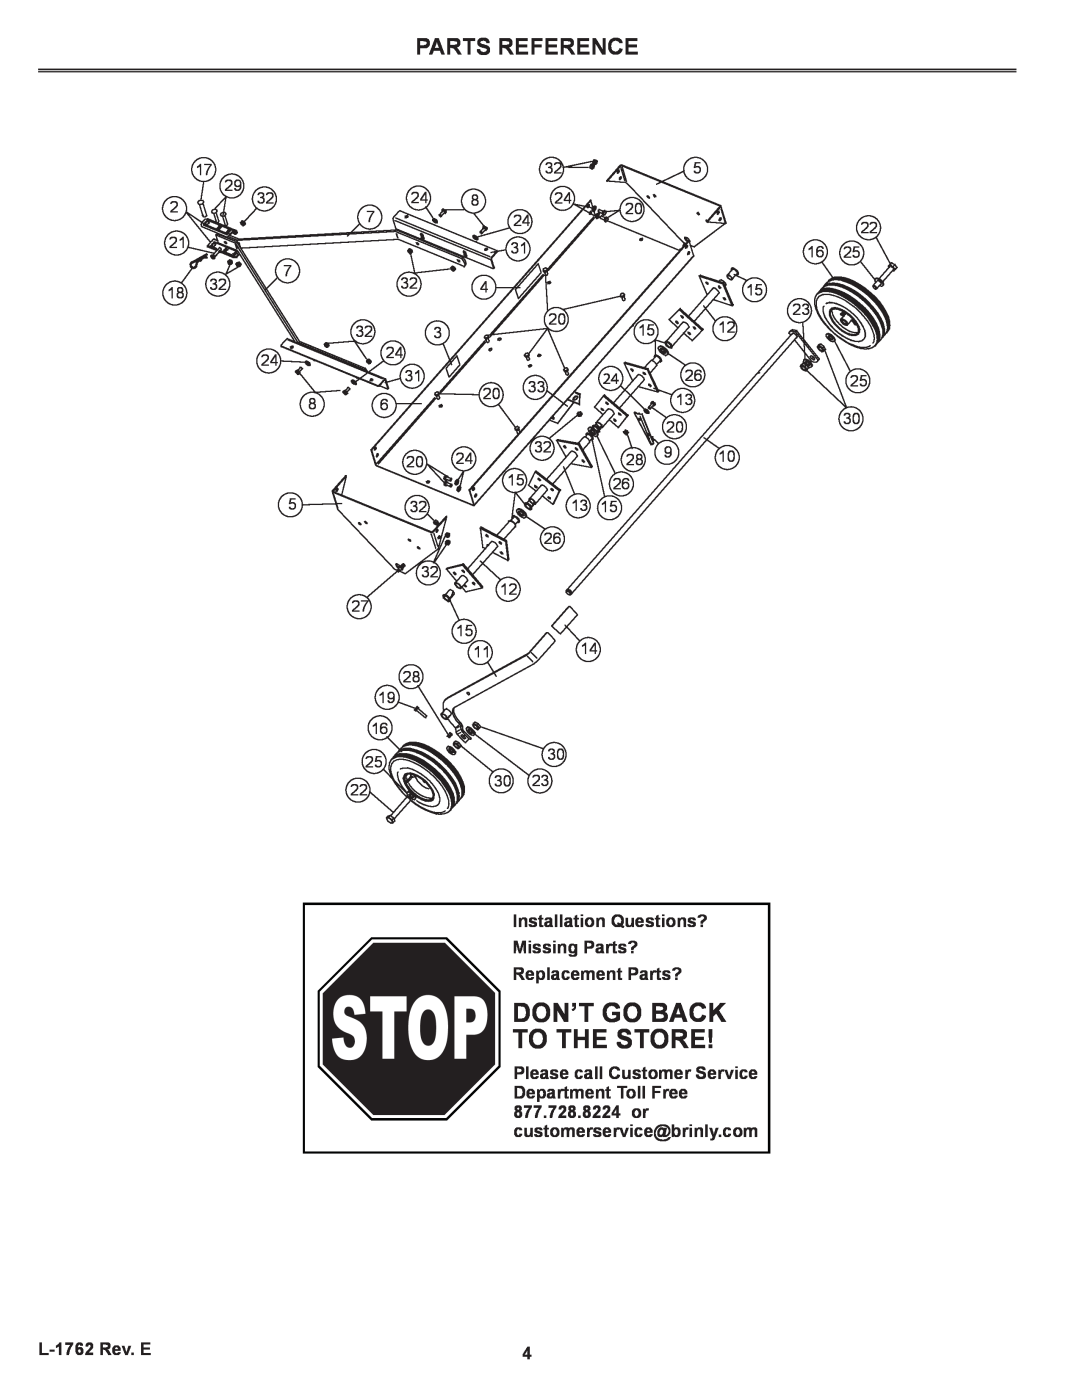 Brinly-Hardy PA-48 BH, PA-40 BH owner manual Parts Reference, Stop Don’T Go Back To The Store 